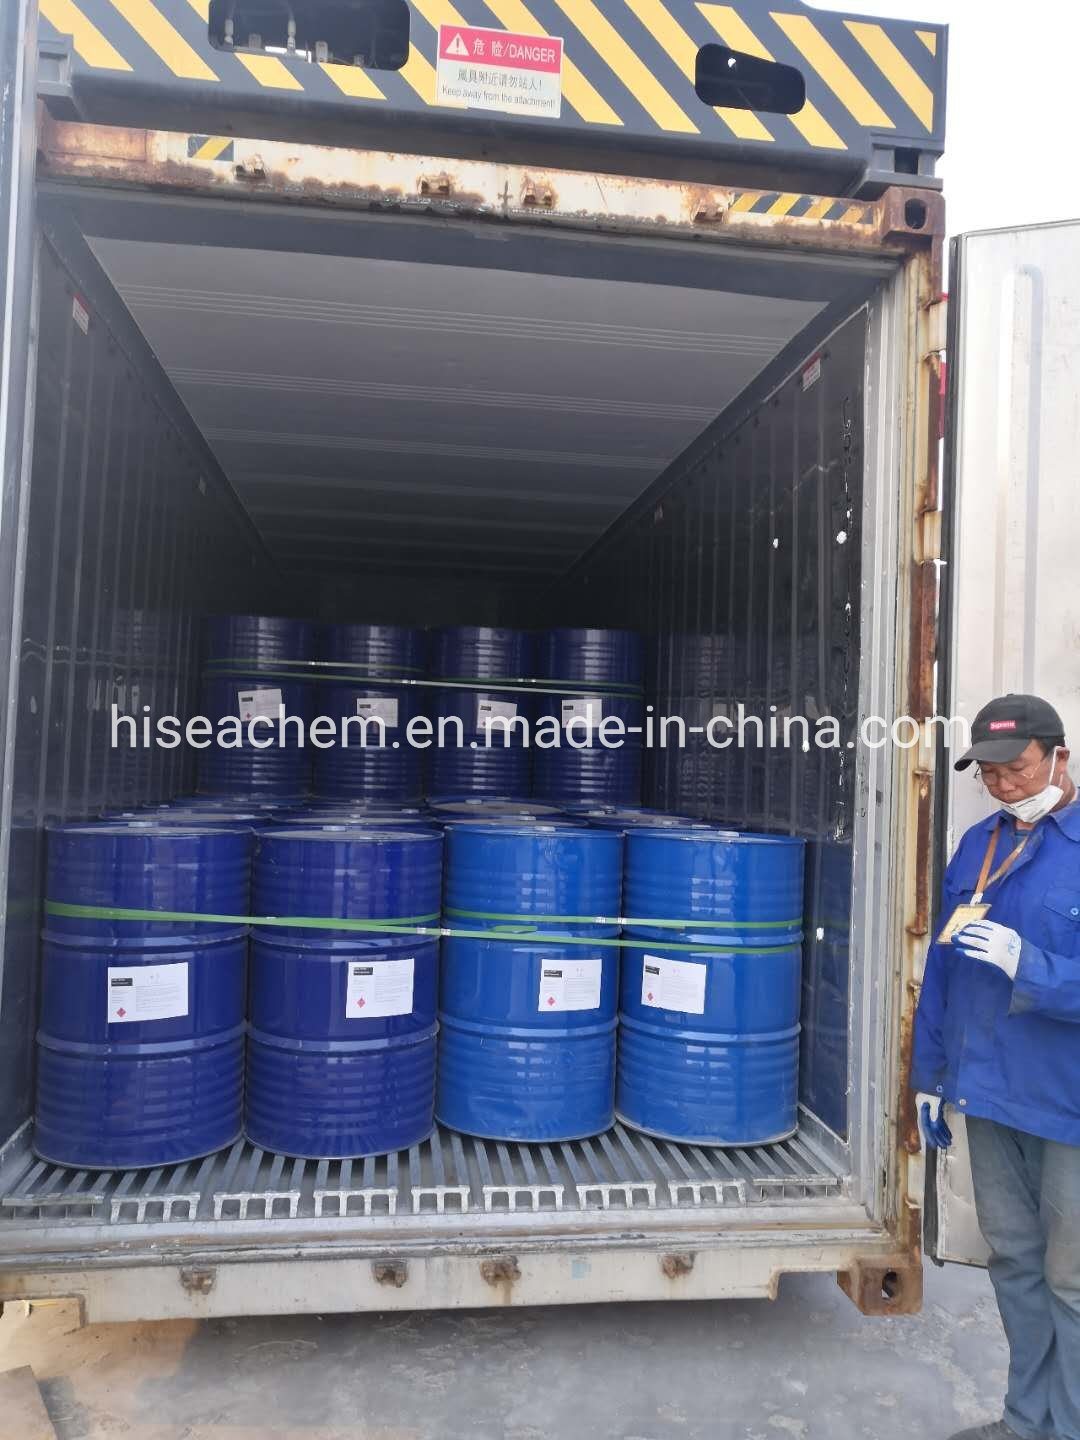 High Quality for Acetonitrile CAS 75-05-8